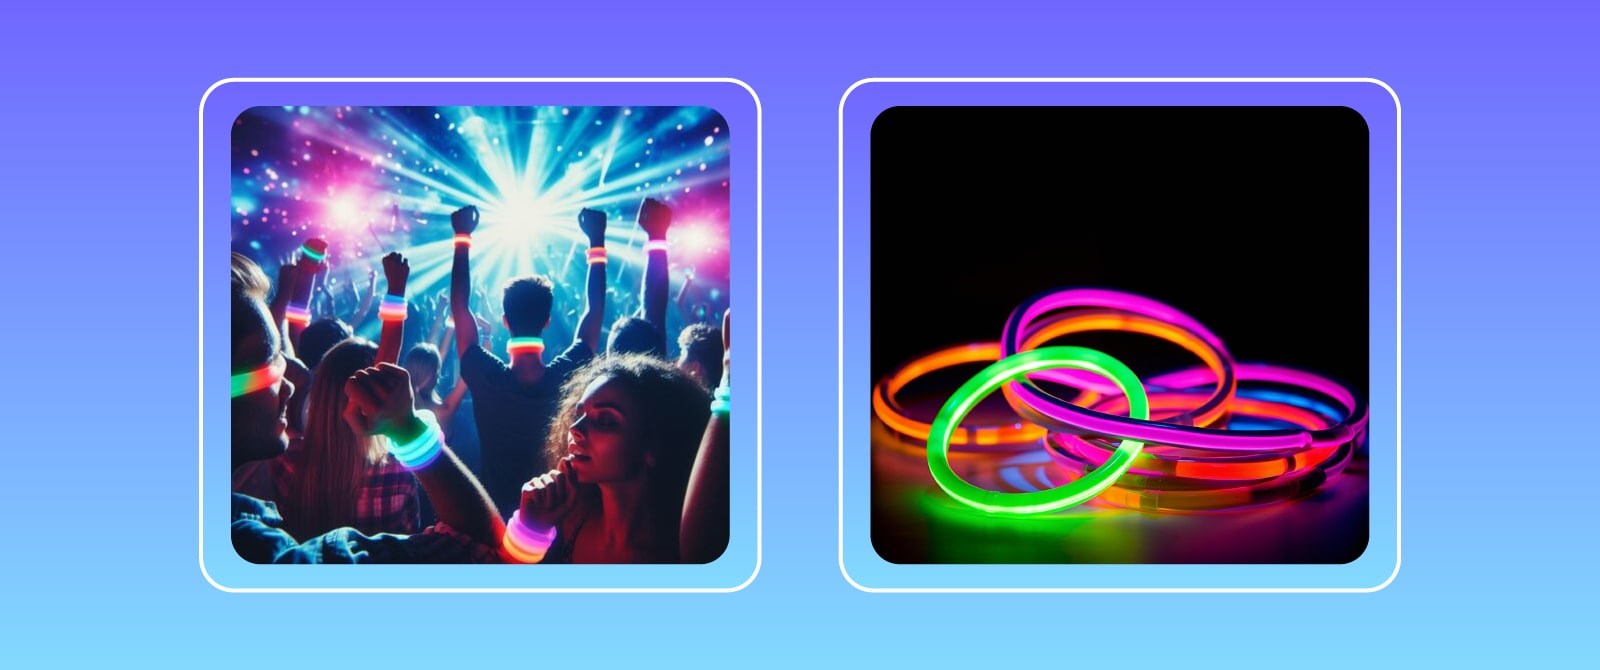 Benefits of Using DMX Remote Controlled LED Glow Wristbands at Concerts